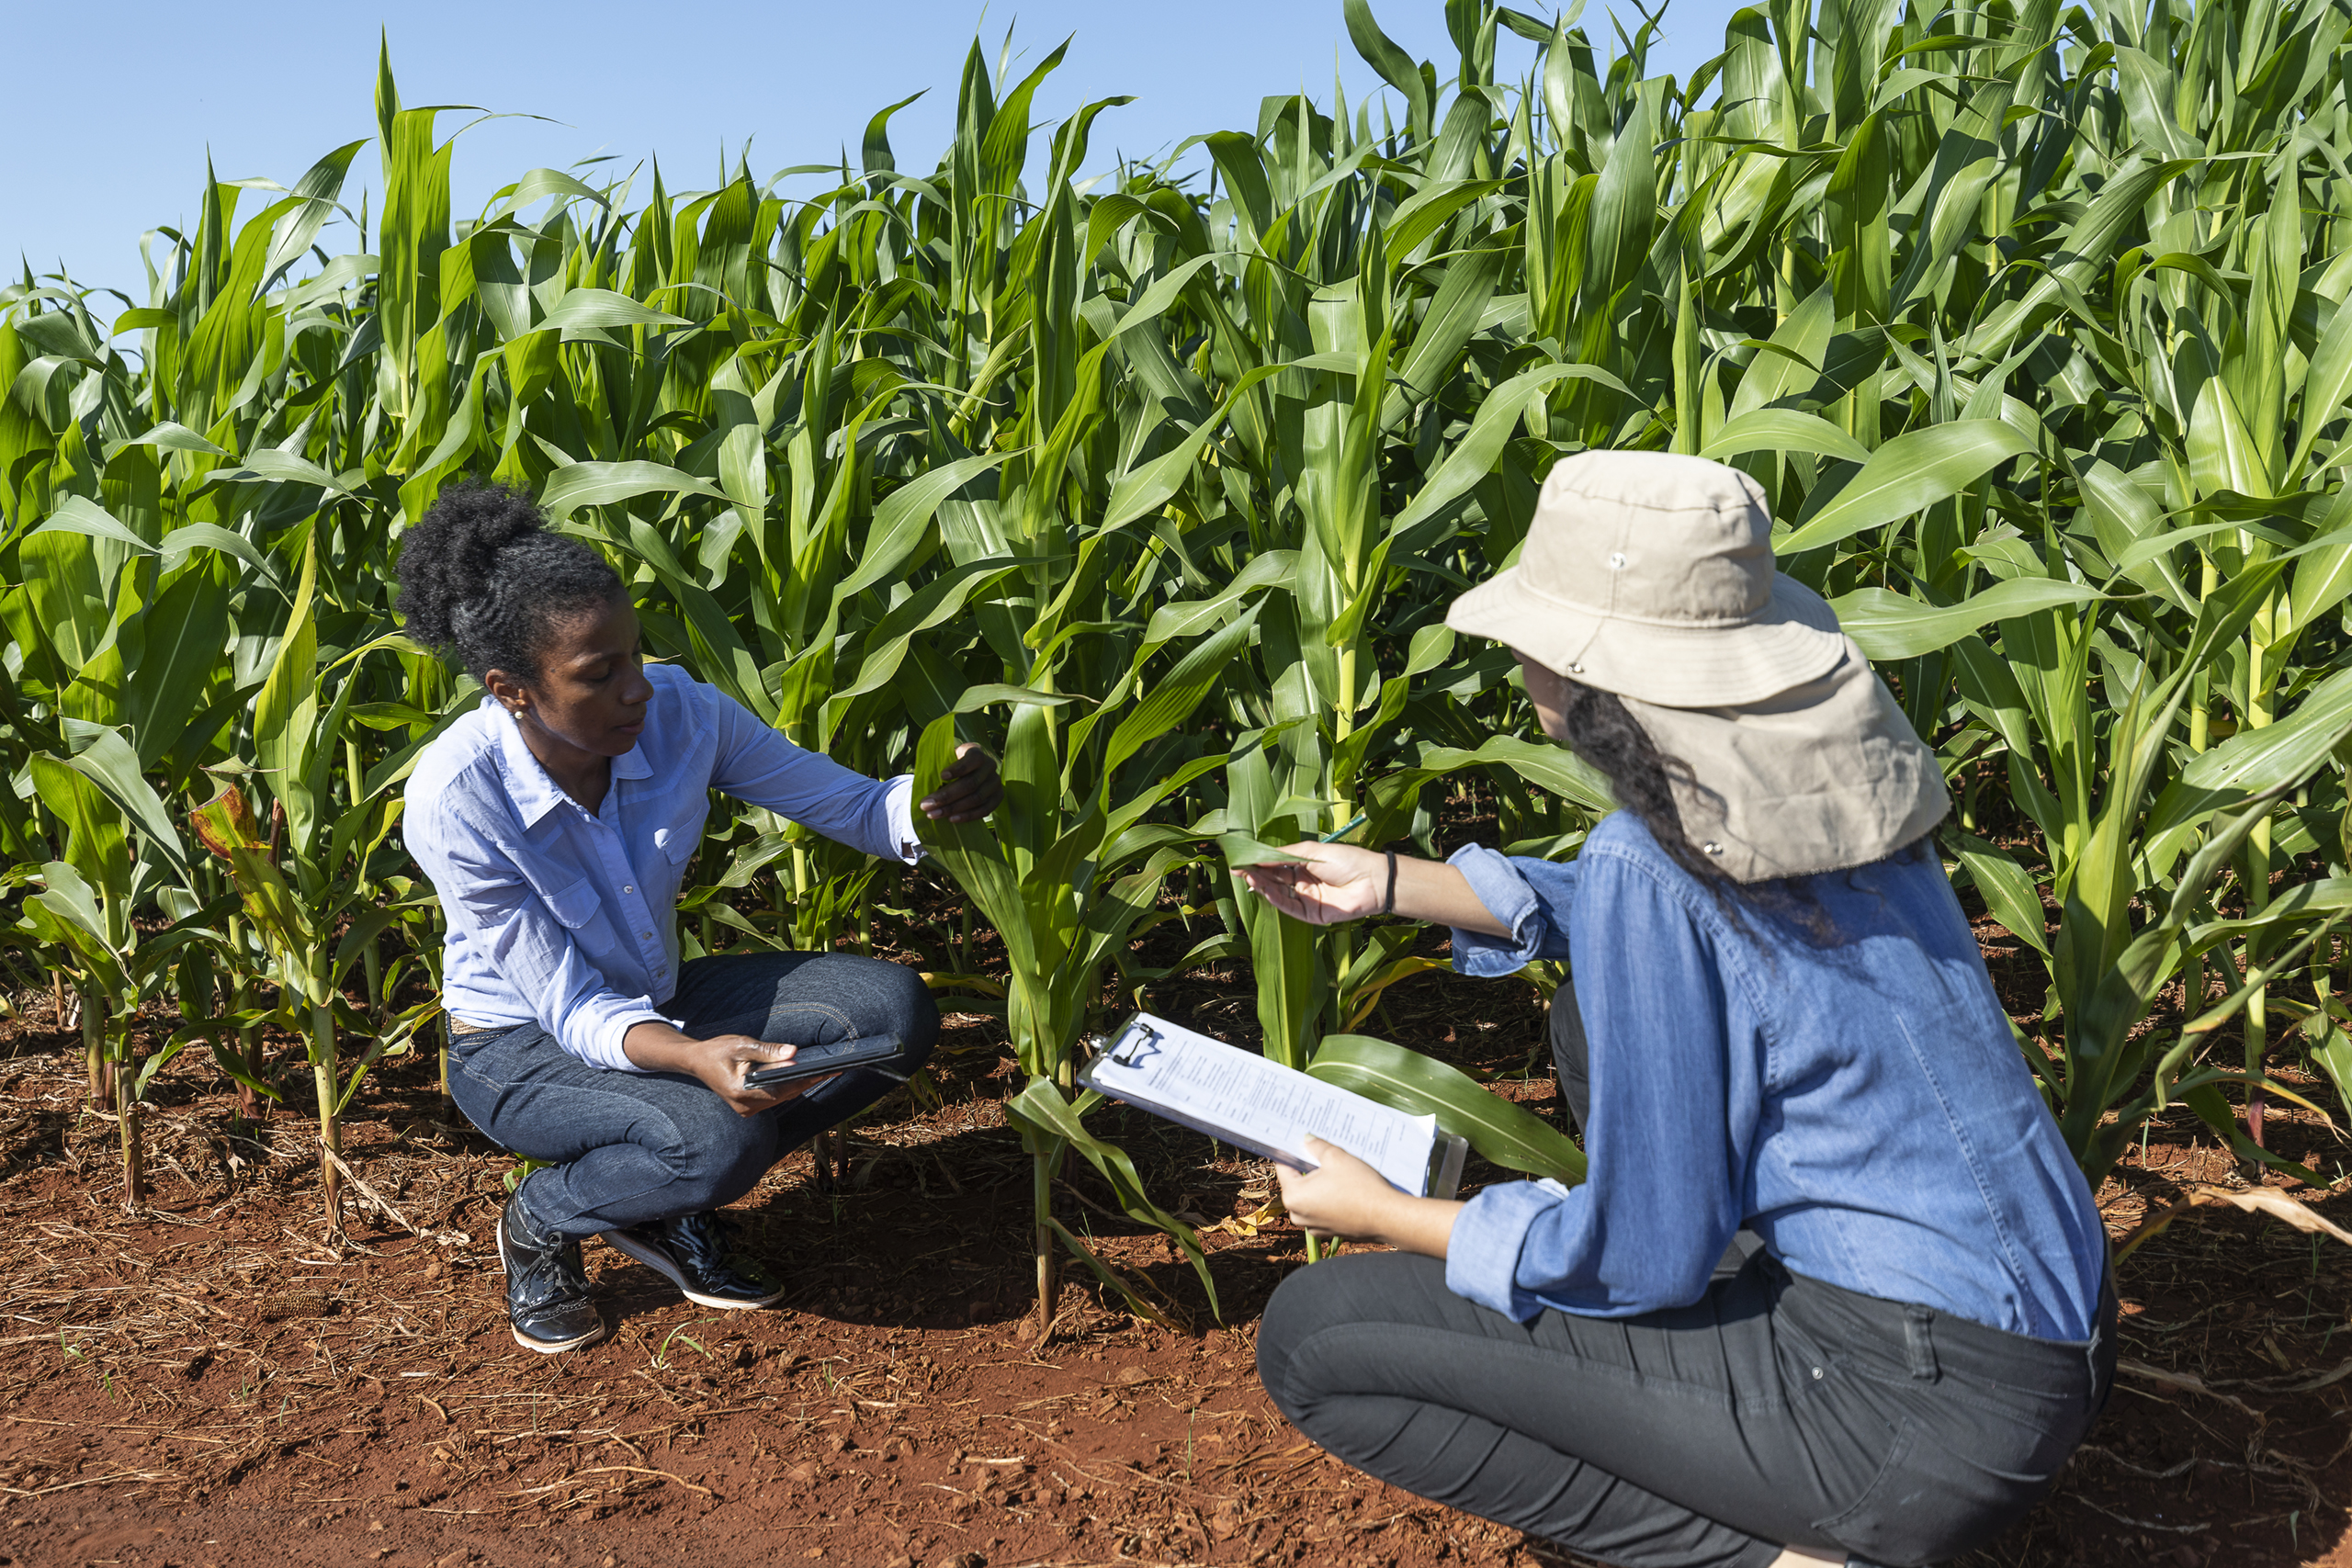 Black women agronomists studying leaves in cornfield